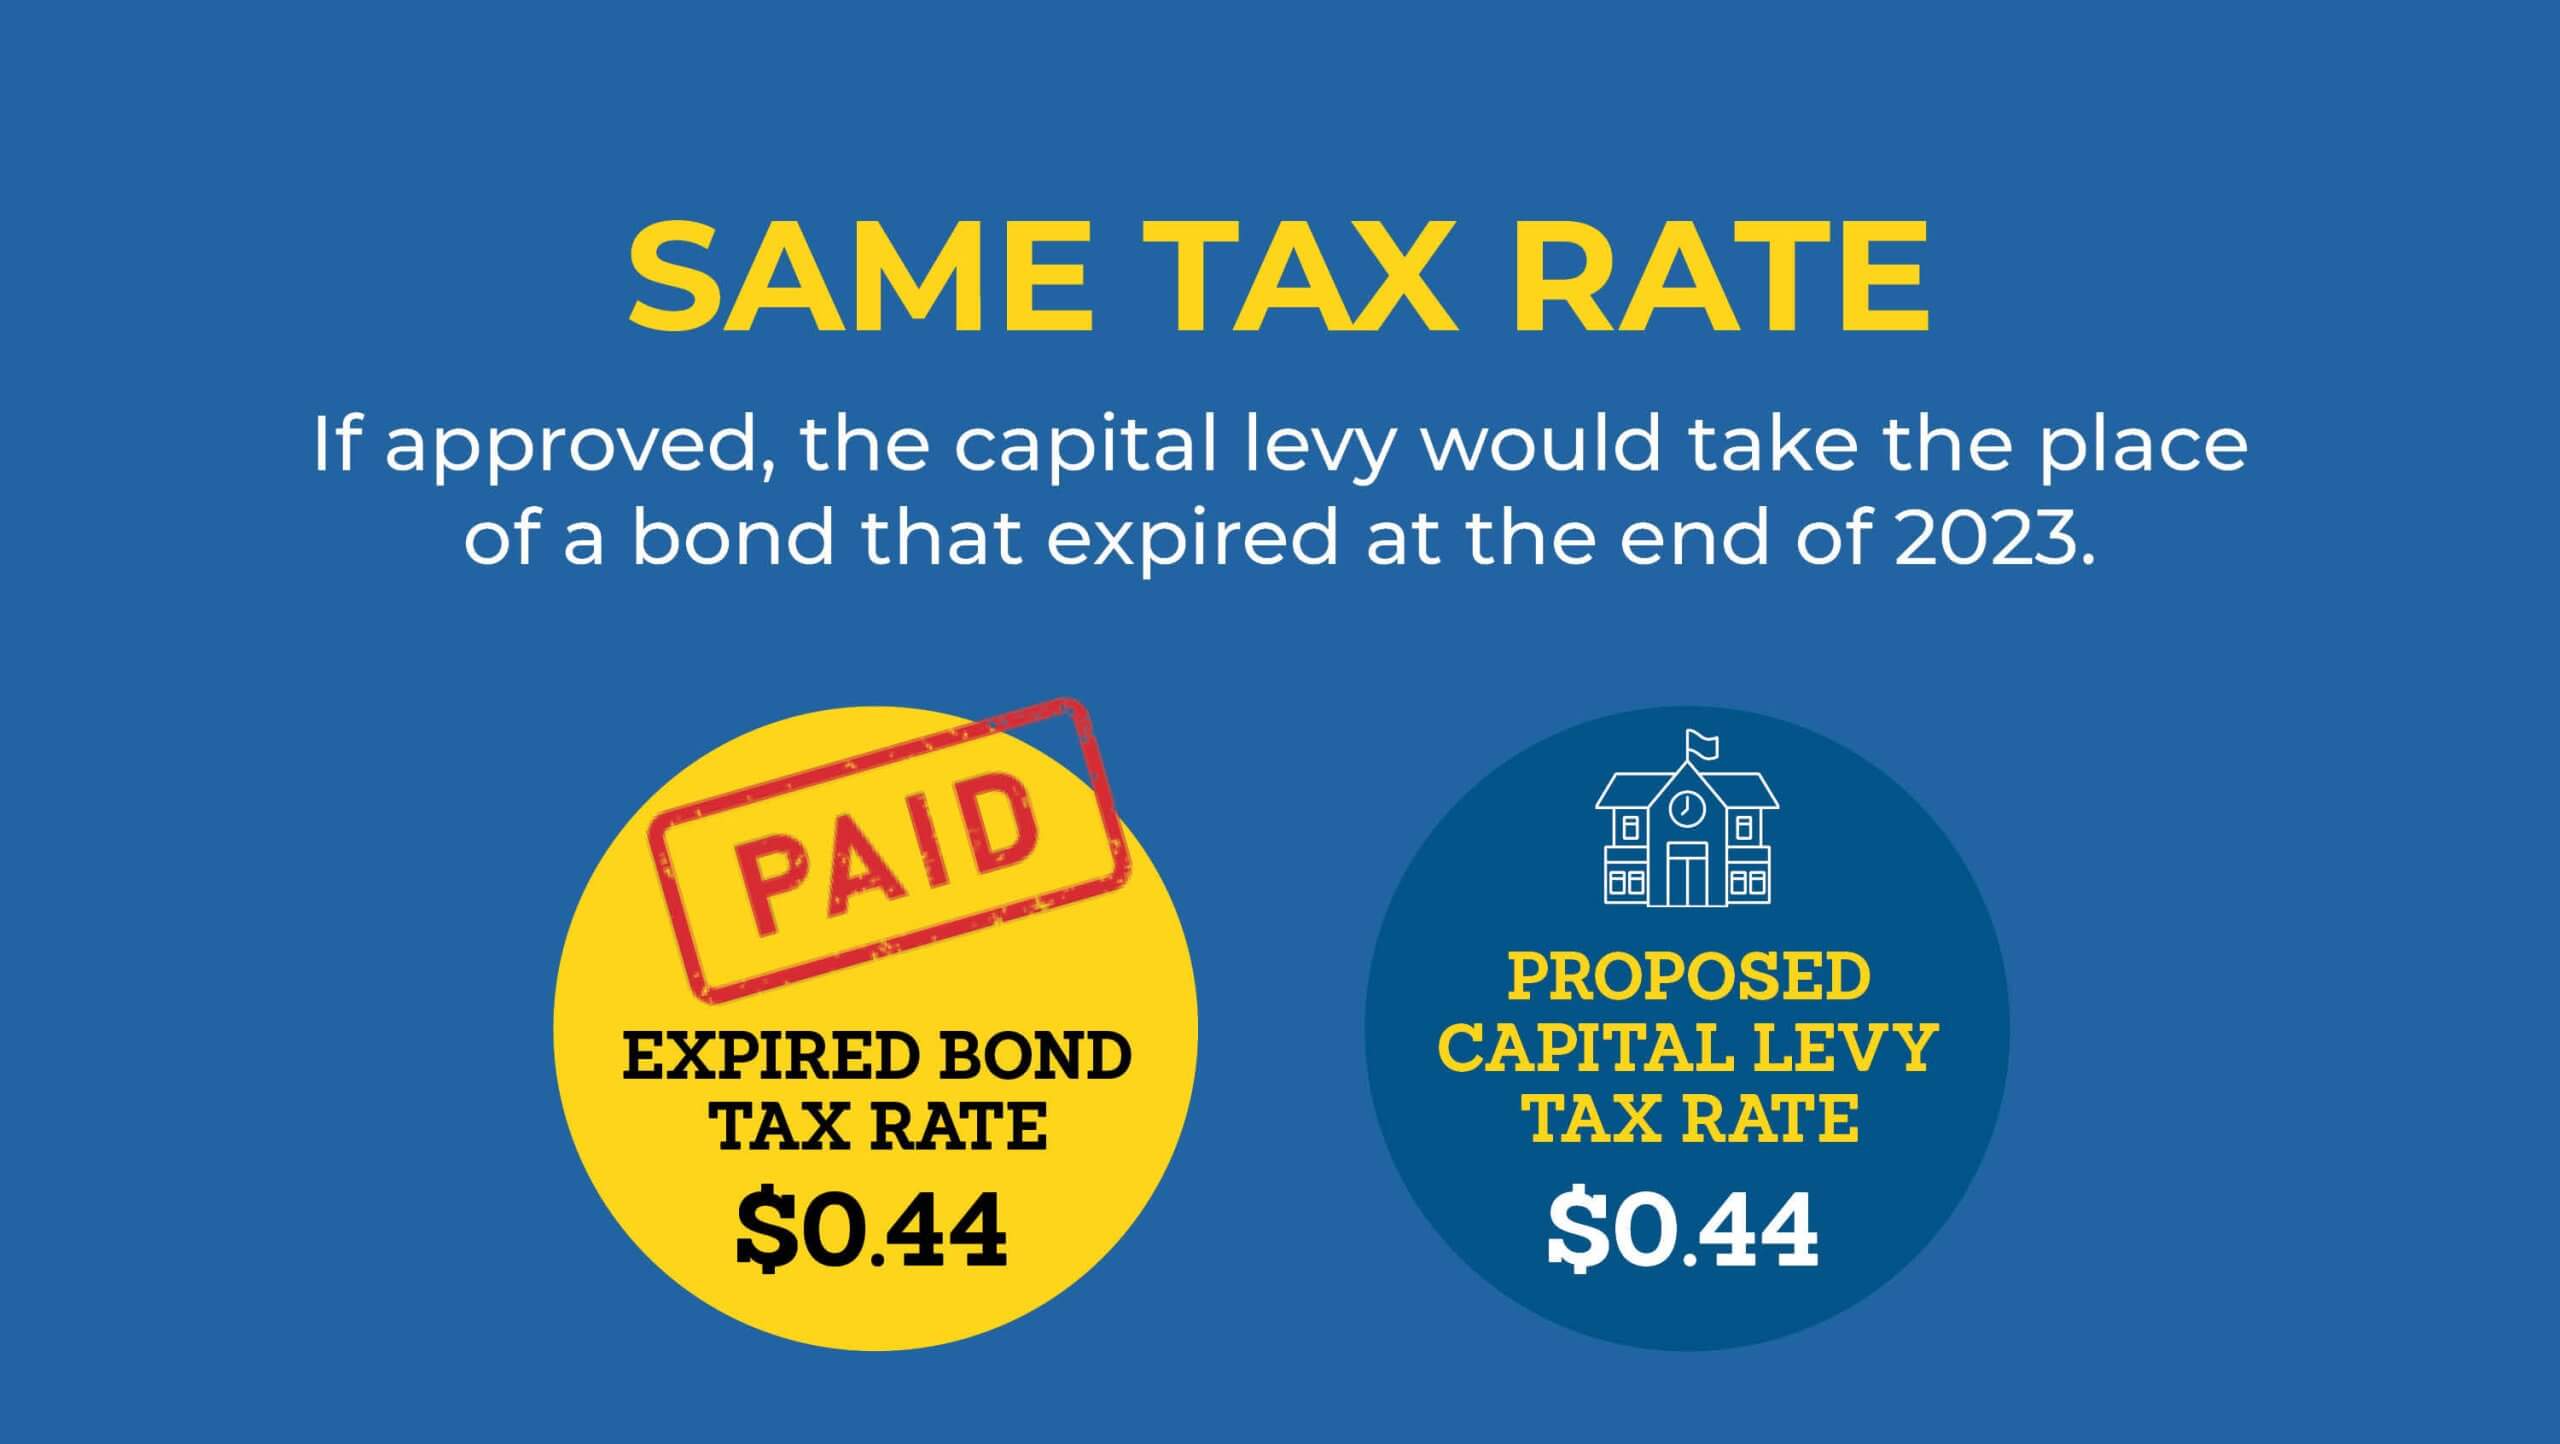 Same tax rate. If approved, the capital levy would take the place of a bond that expired at the end of 2023.